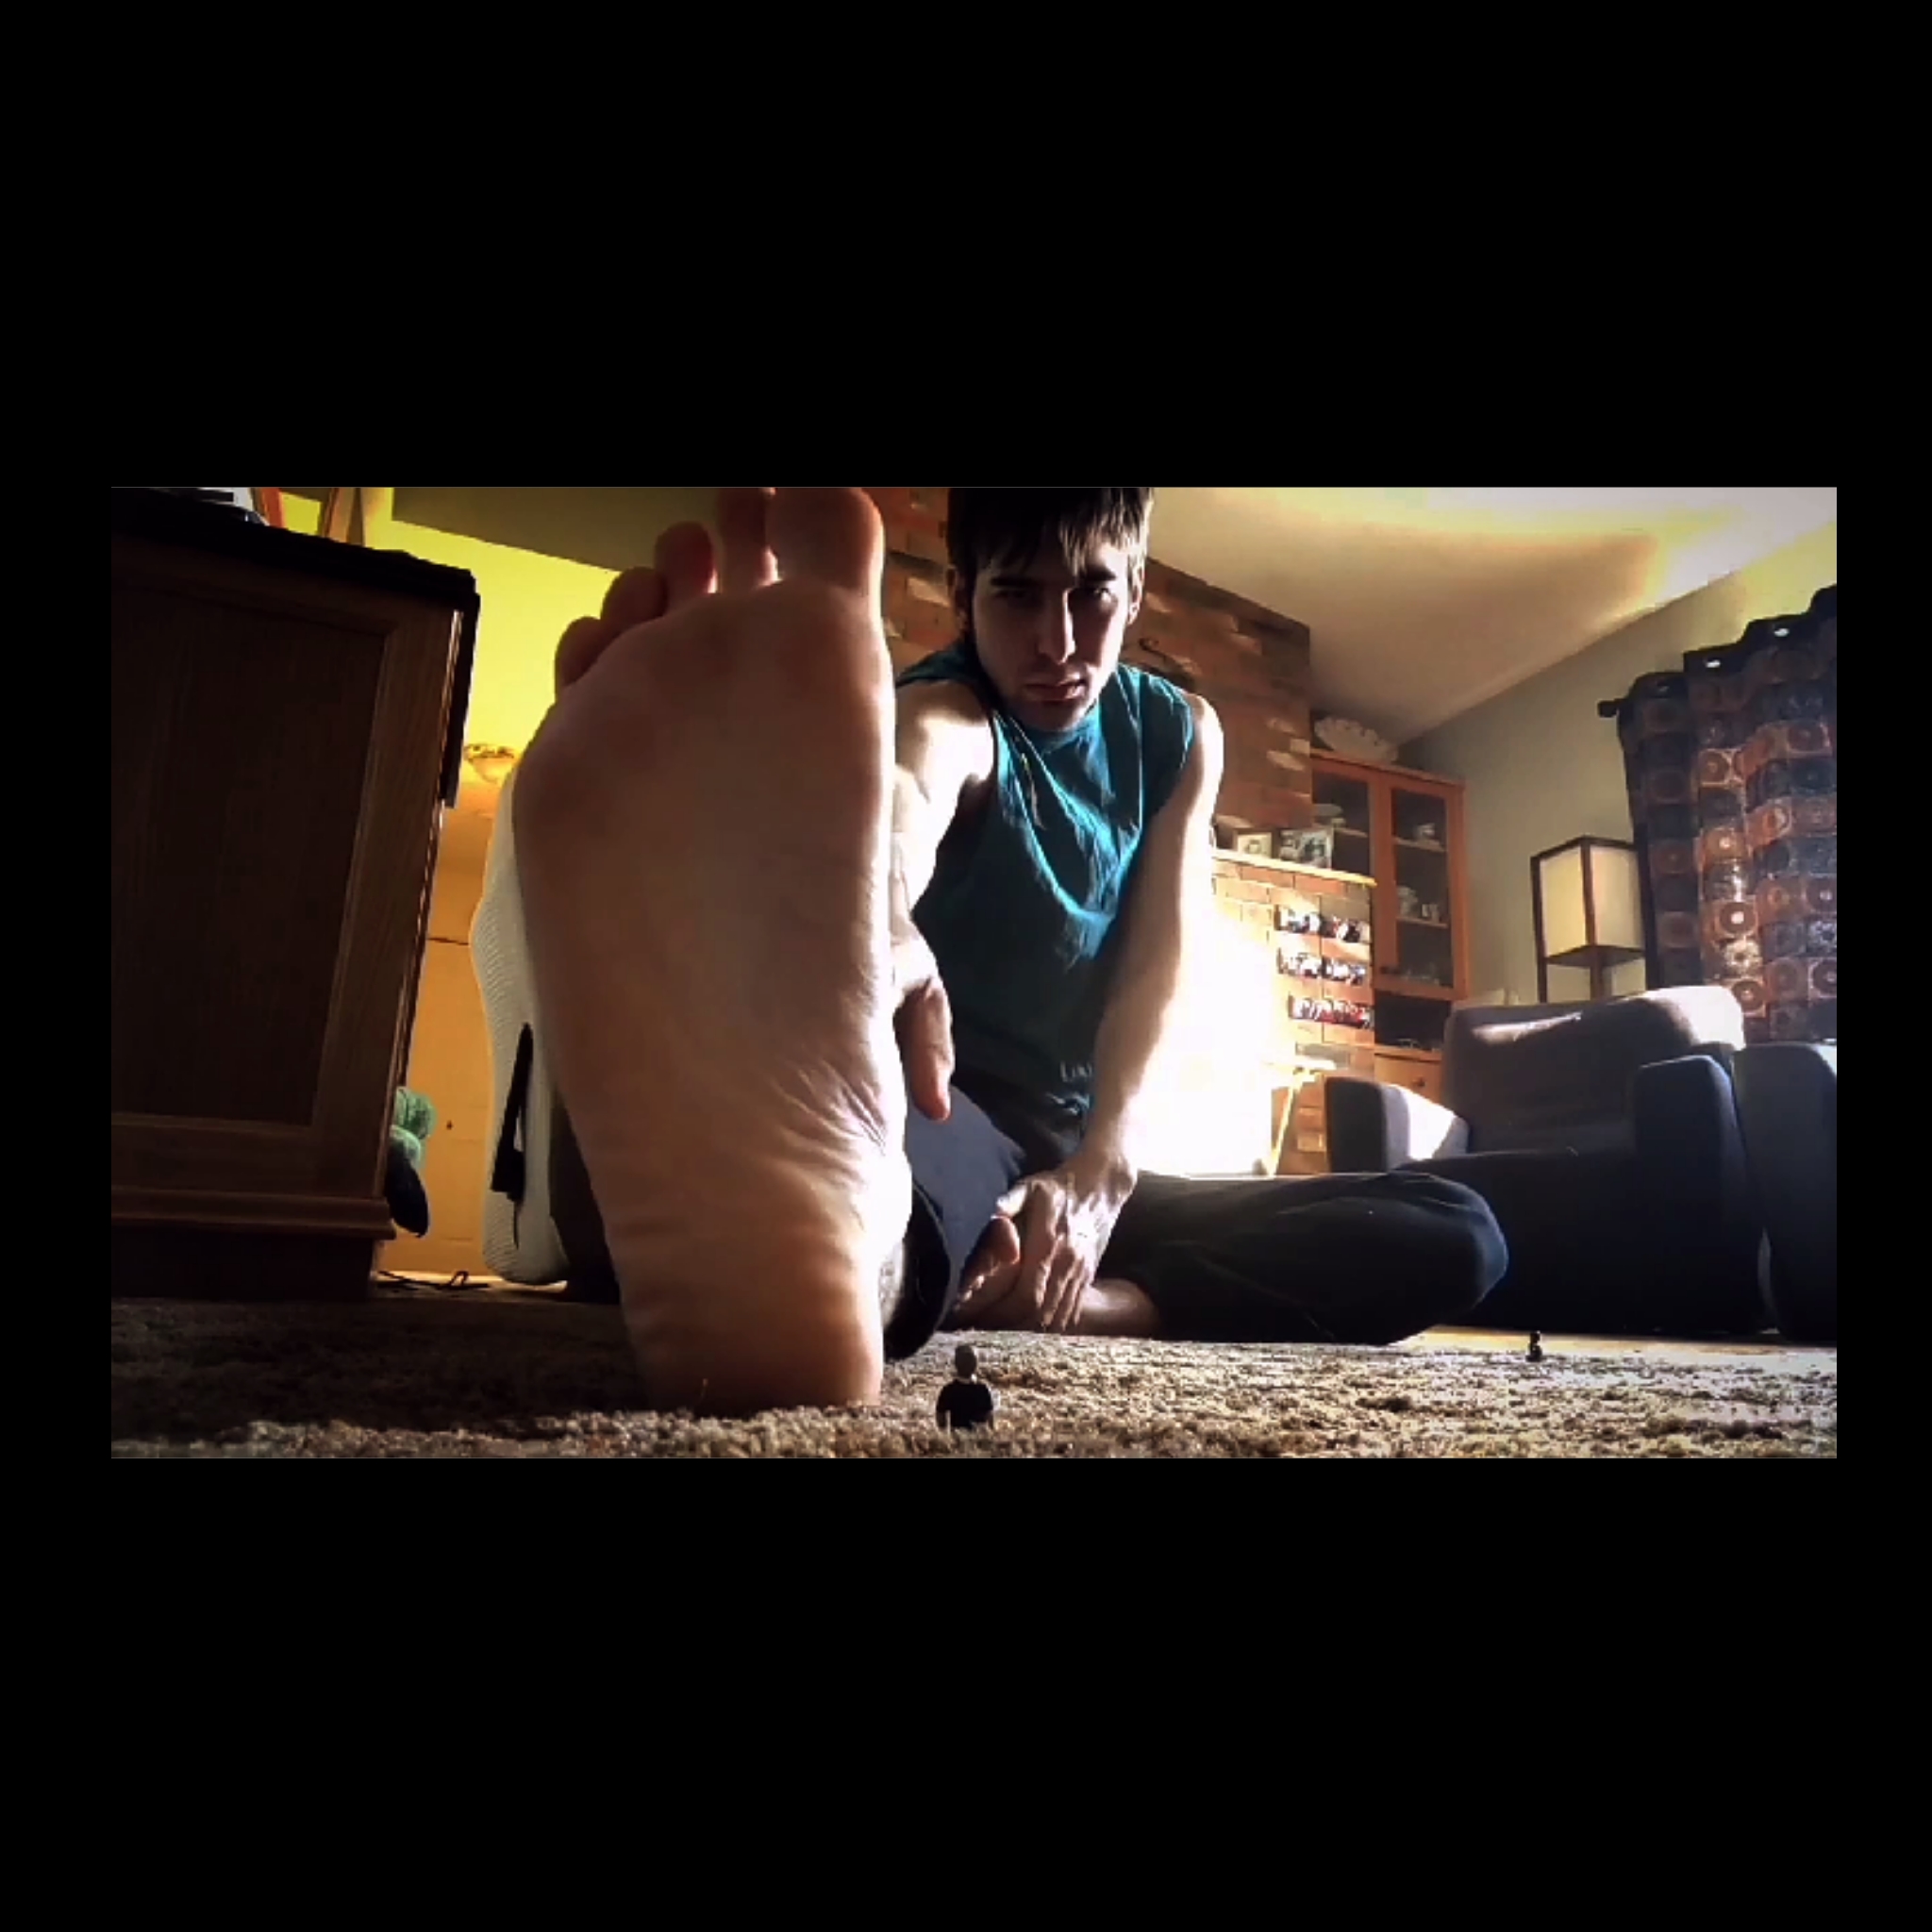 Giant finds tinies at home - Macrophilia, feet and vore